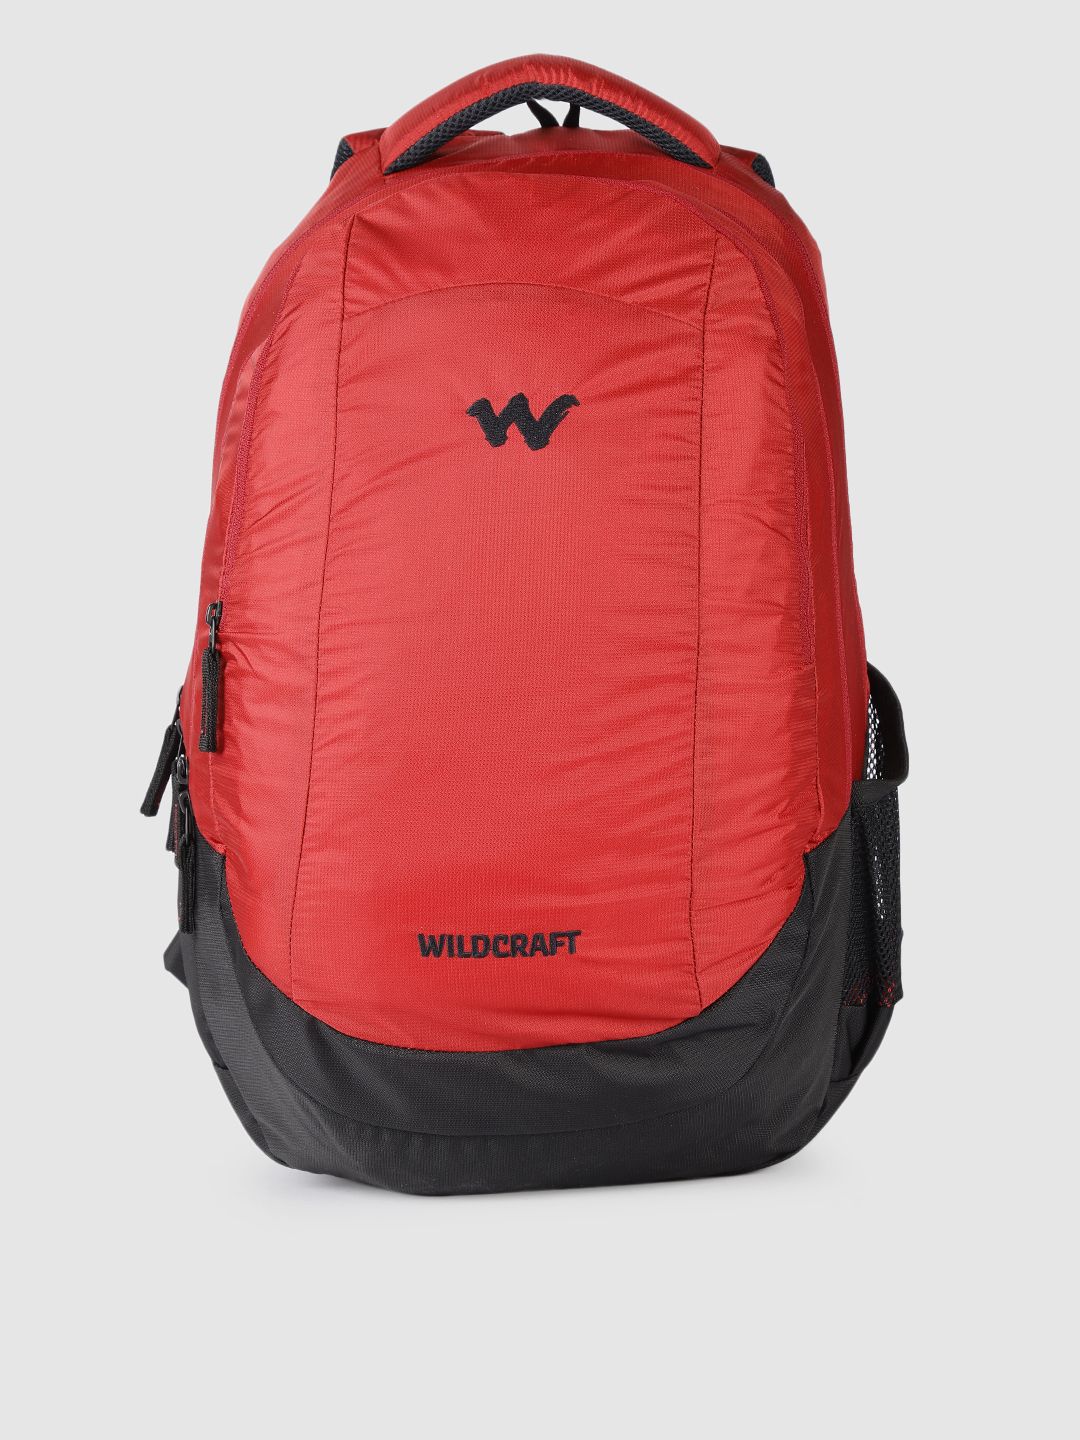 Wildcraft Unisex Red Peza Solid Backpack Price in India